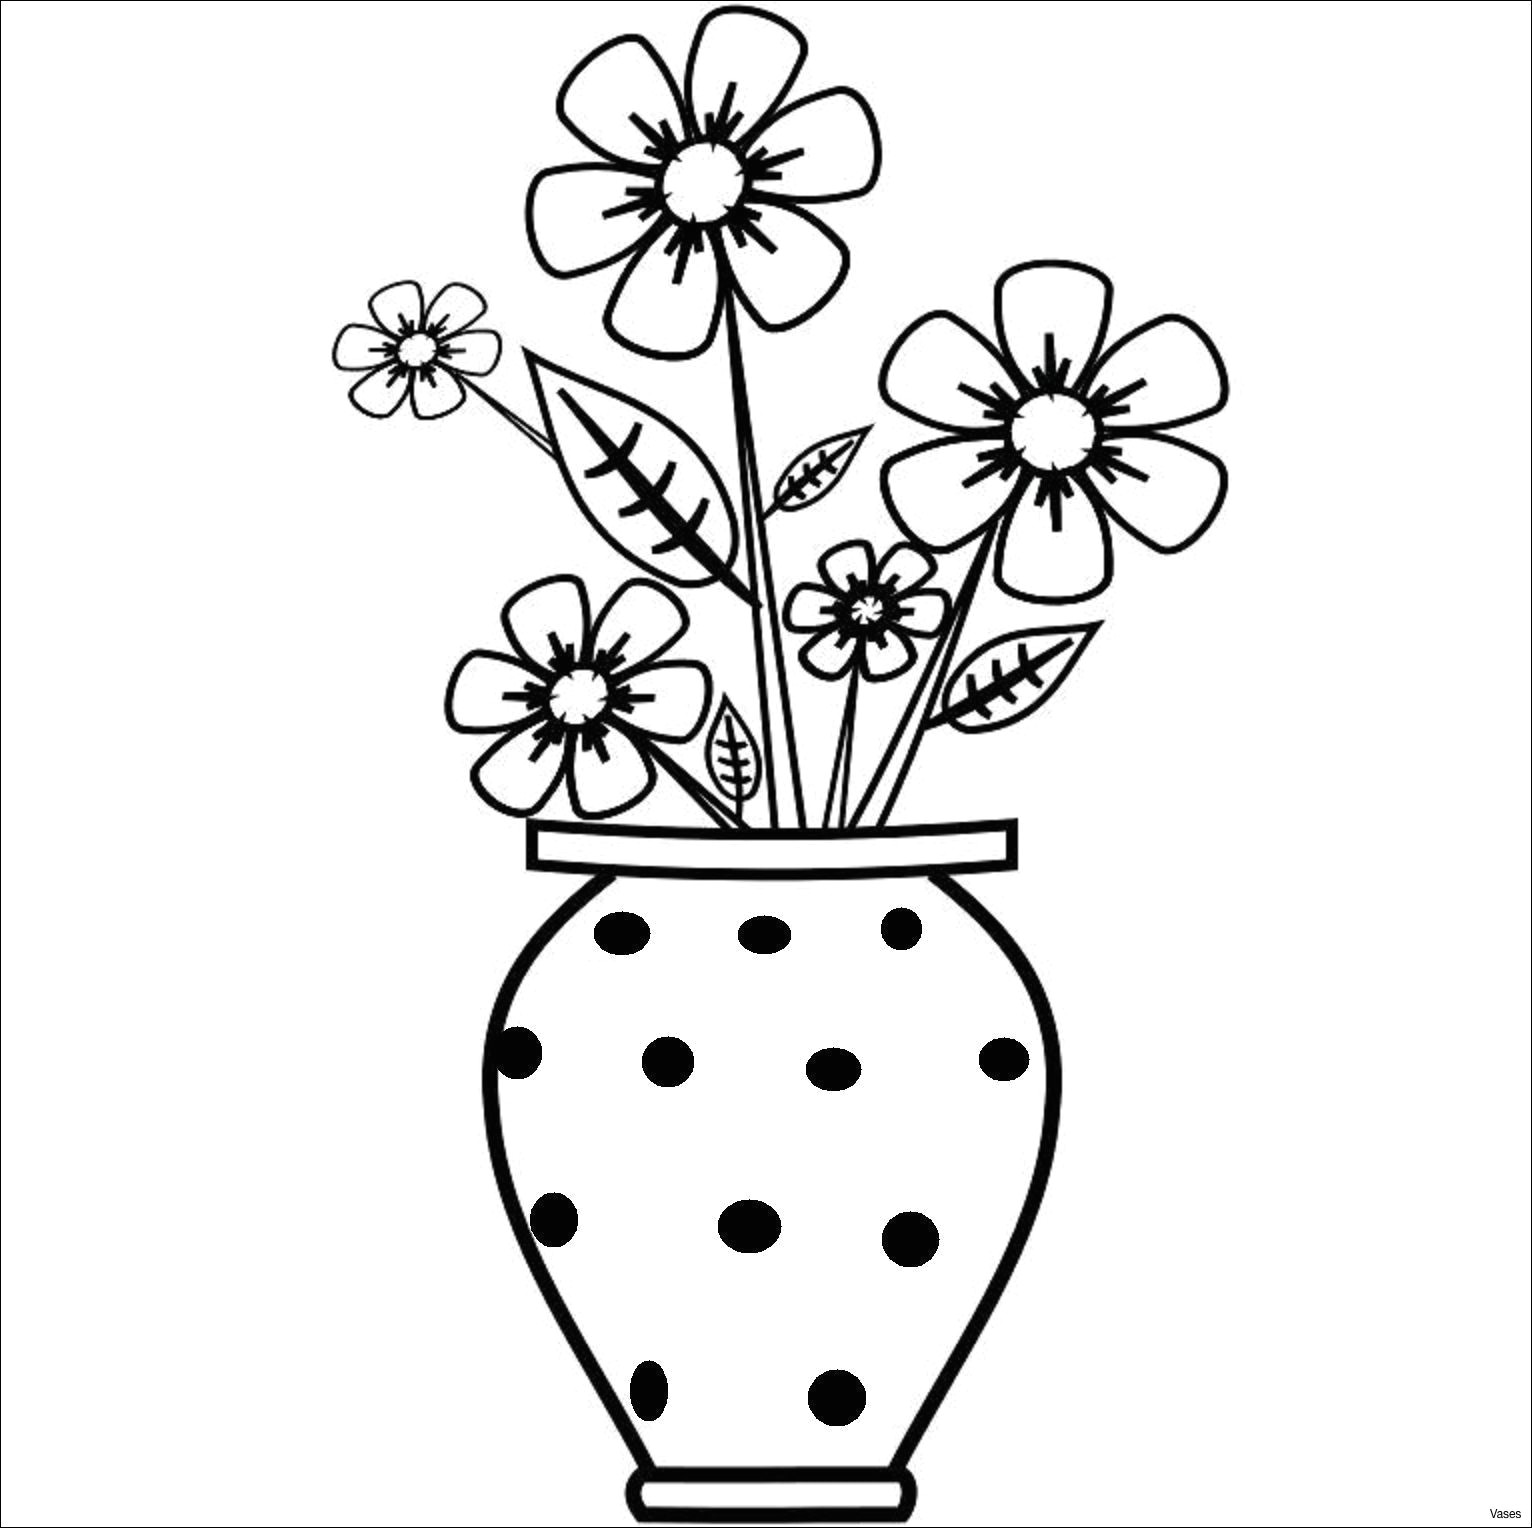 Simple Line Drawings Of Roses Images Of Easy Drawings Vase Art Drawings How to Draw A Vase Step 2h